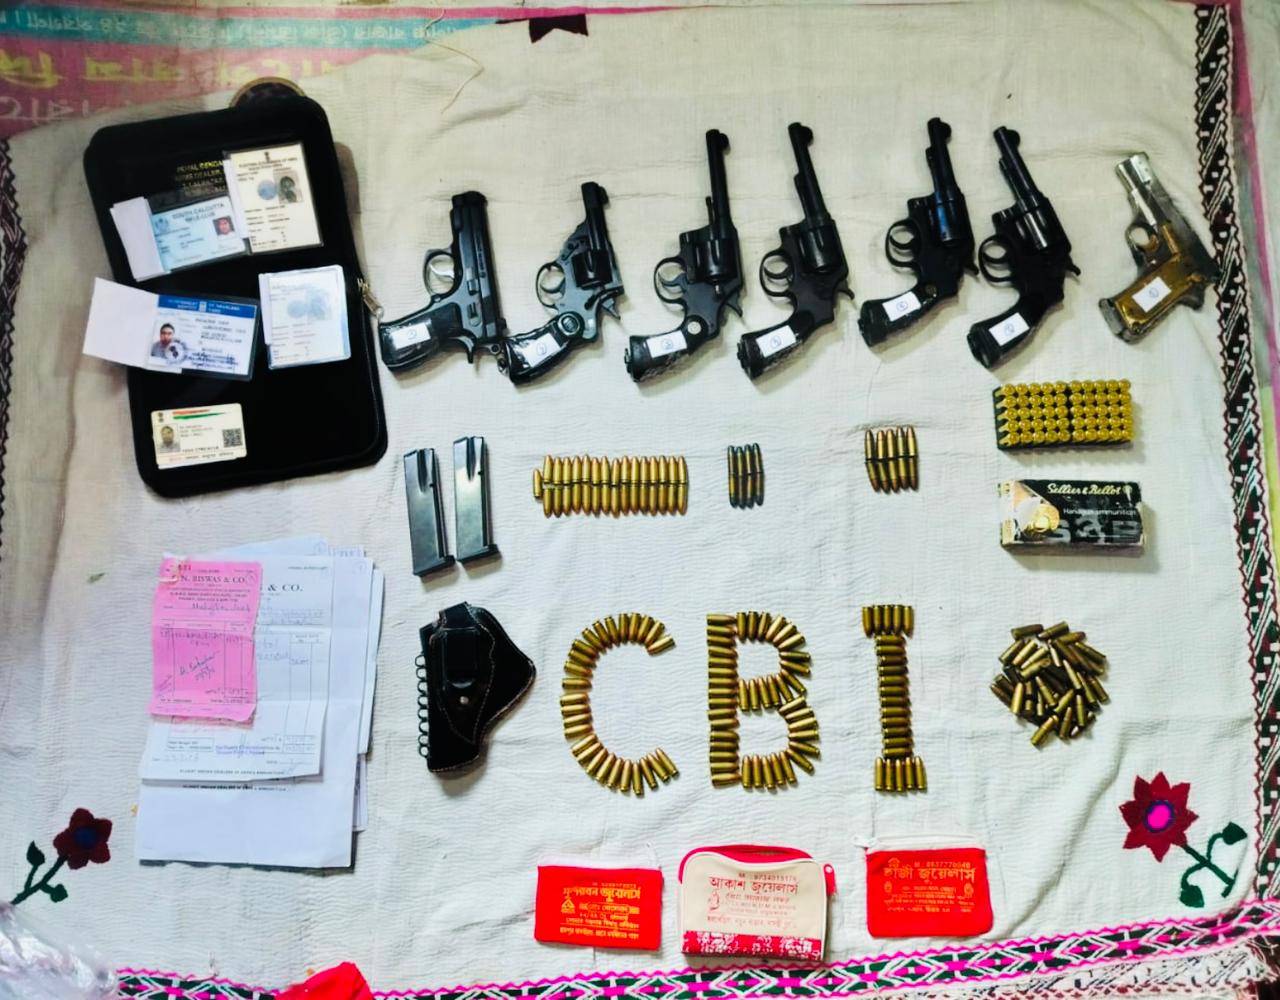 CBI RECOVERS LARGE NUMBER OF ARMS AND AMMUNITIONS DURING SEARCHES AT SANDESHKHALI IN A CASE RELATED TO VIOLENCE AGAINST ED OFFICIALS